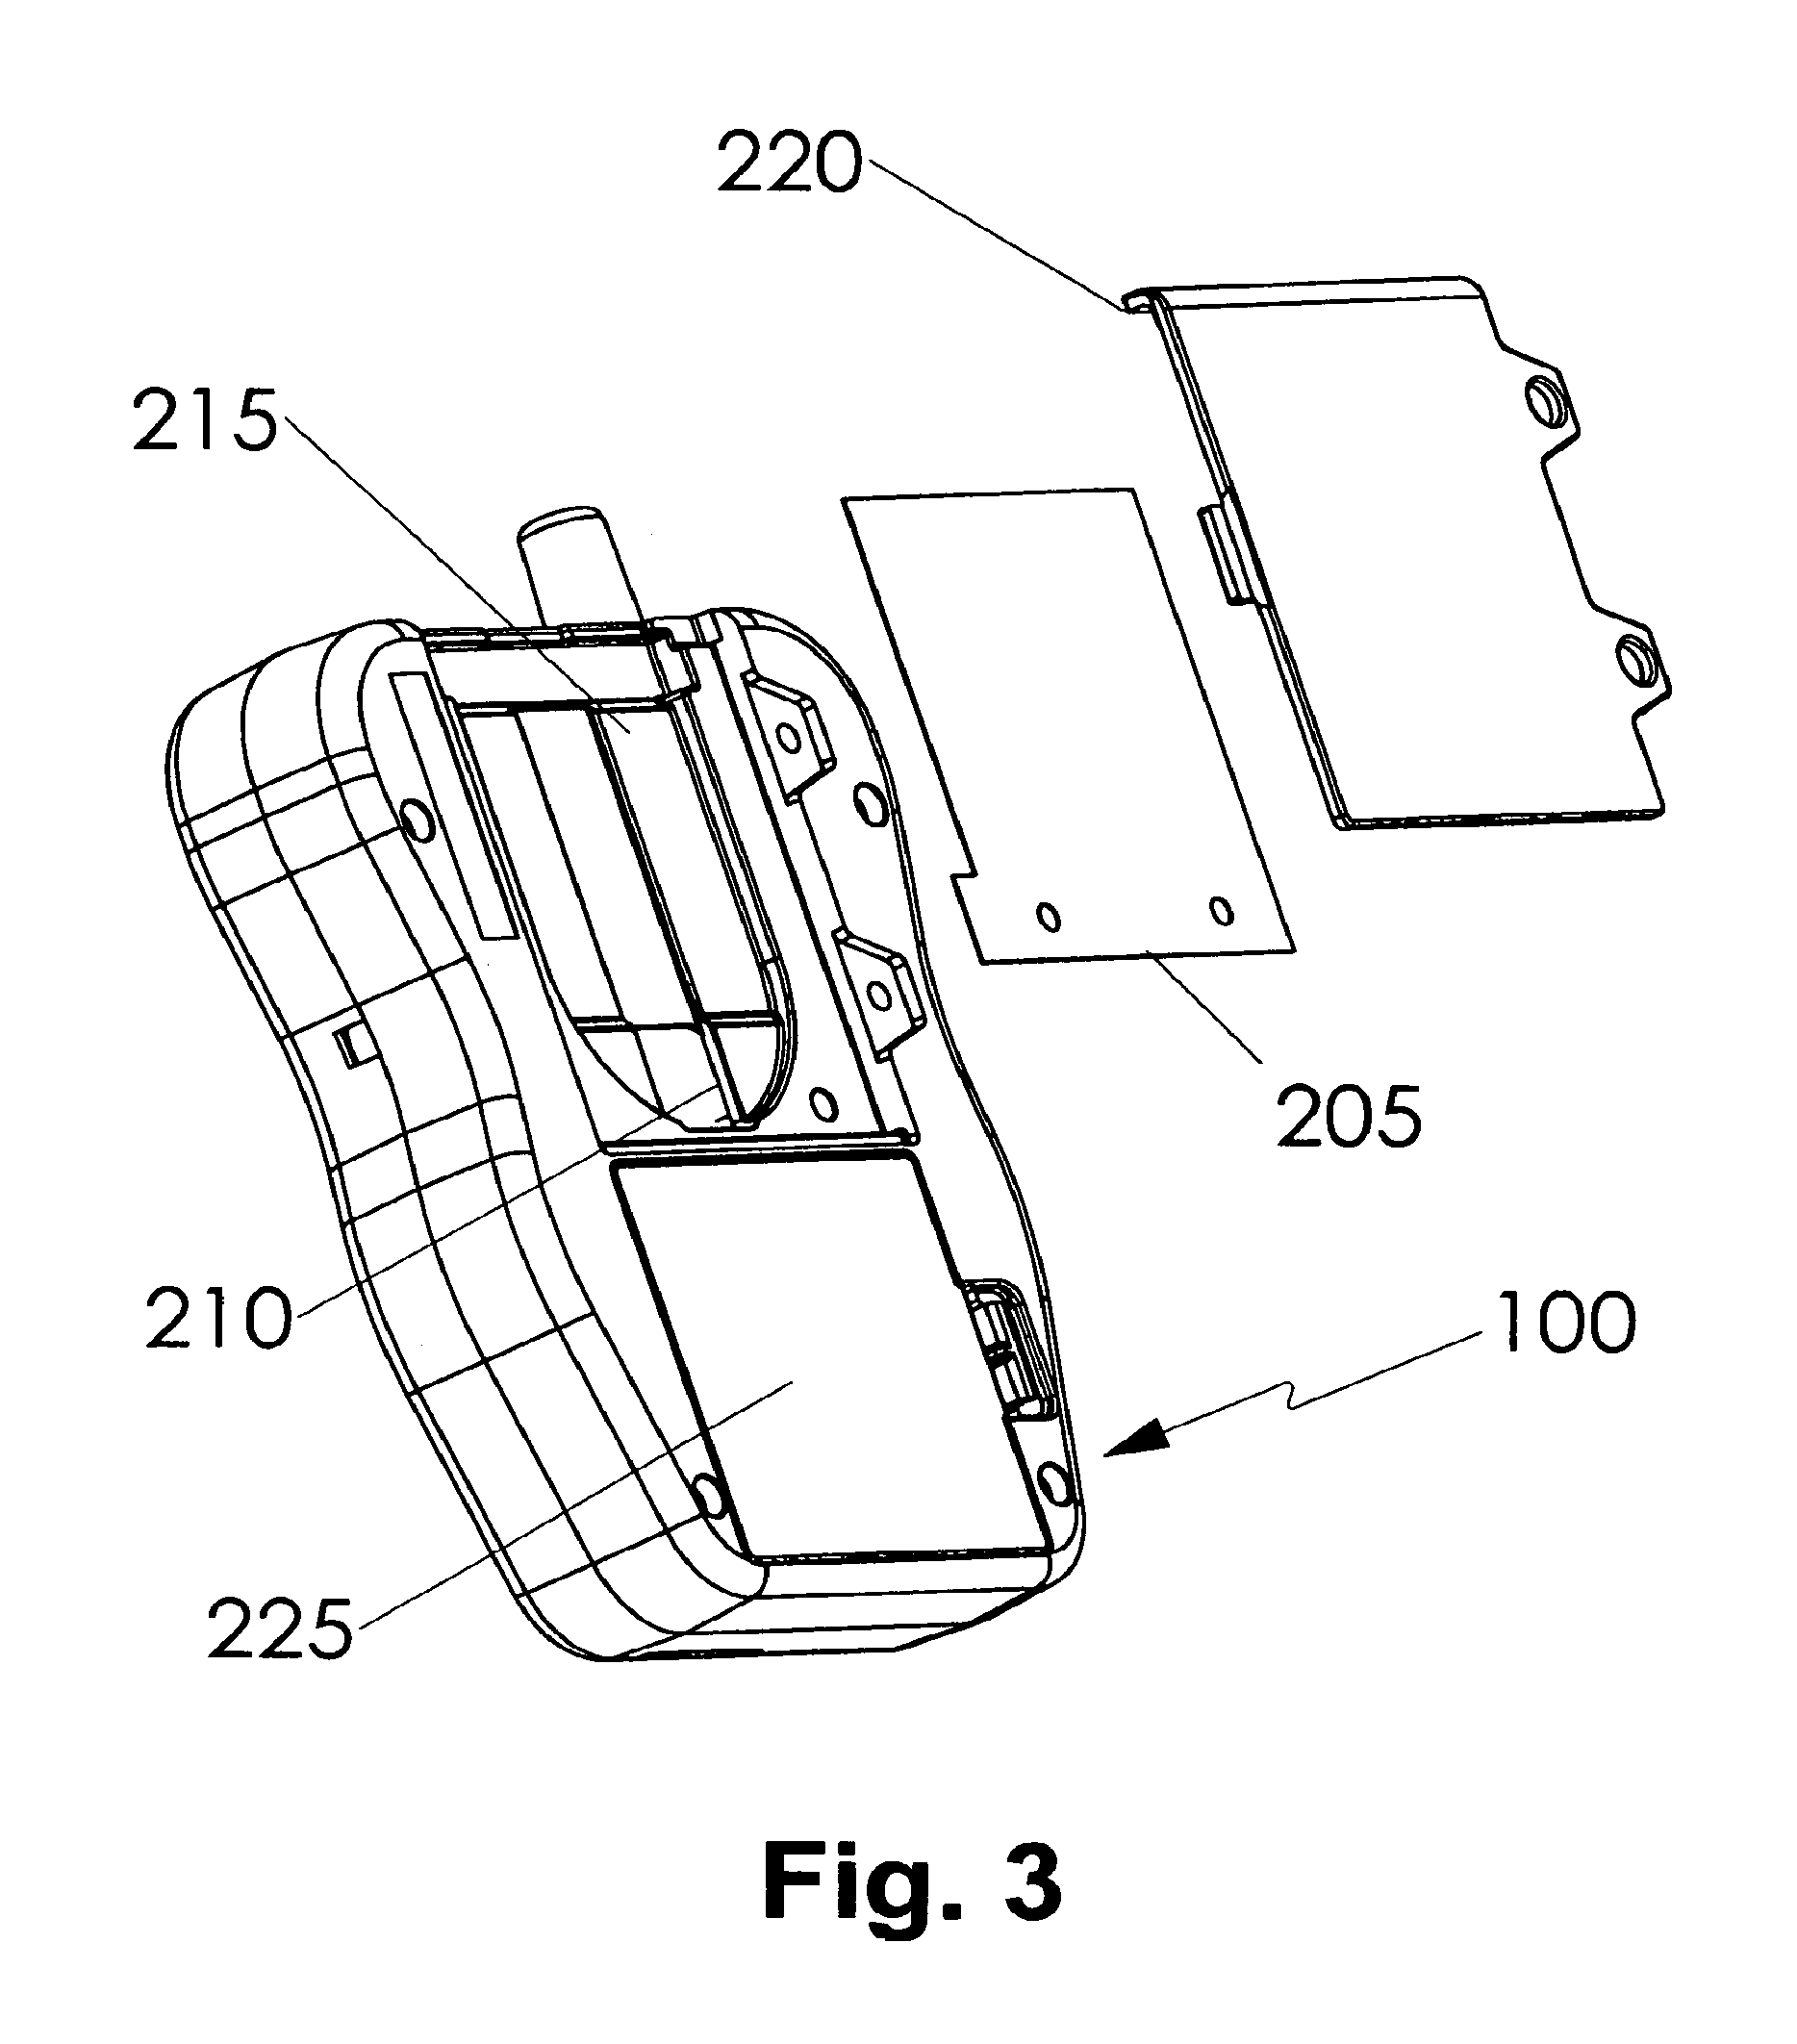 Apparatus and method for detection of trace chemicals